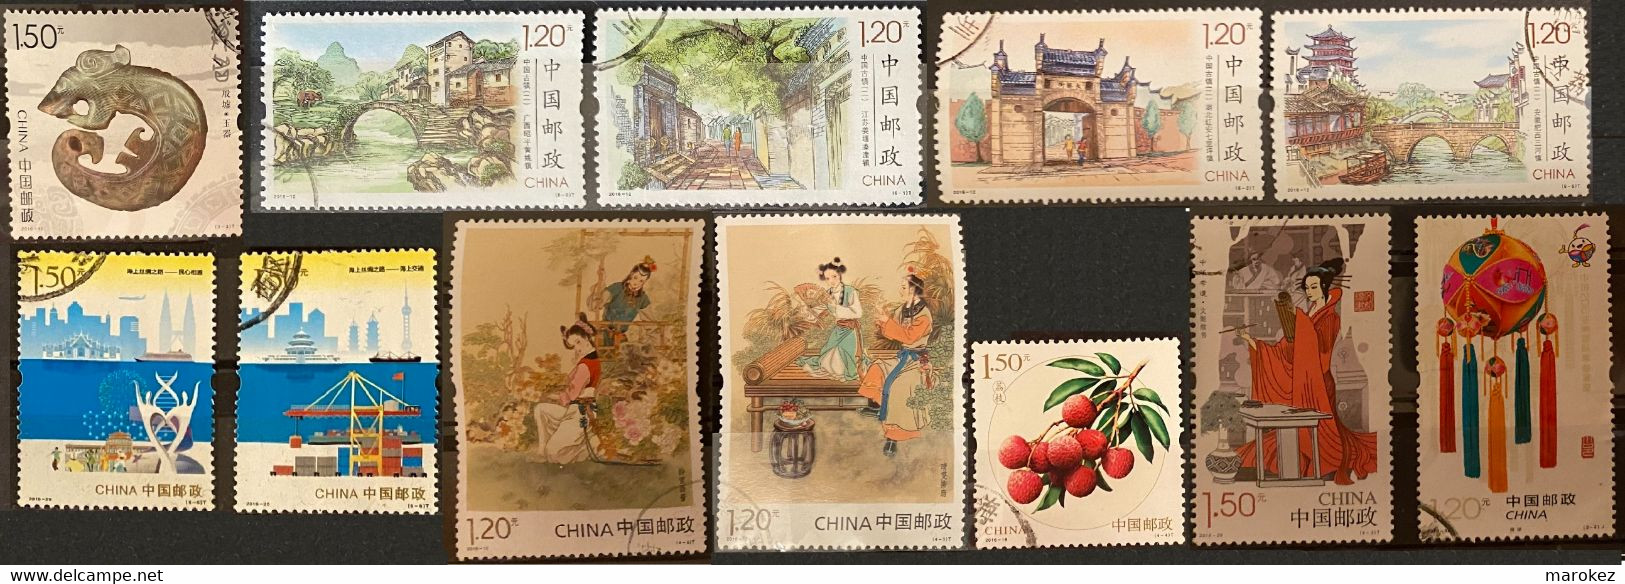 CHINA PRC 2016 12 Postally Used Stamps MICHEL # 4789-90,4793-94,4800-01,4809,4813,4835-36,4841,4861 - Gebraucht